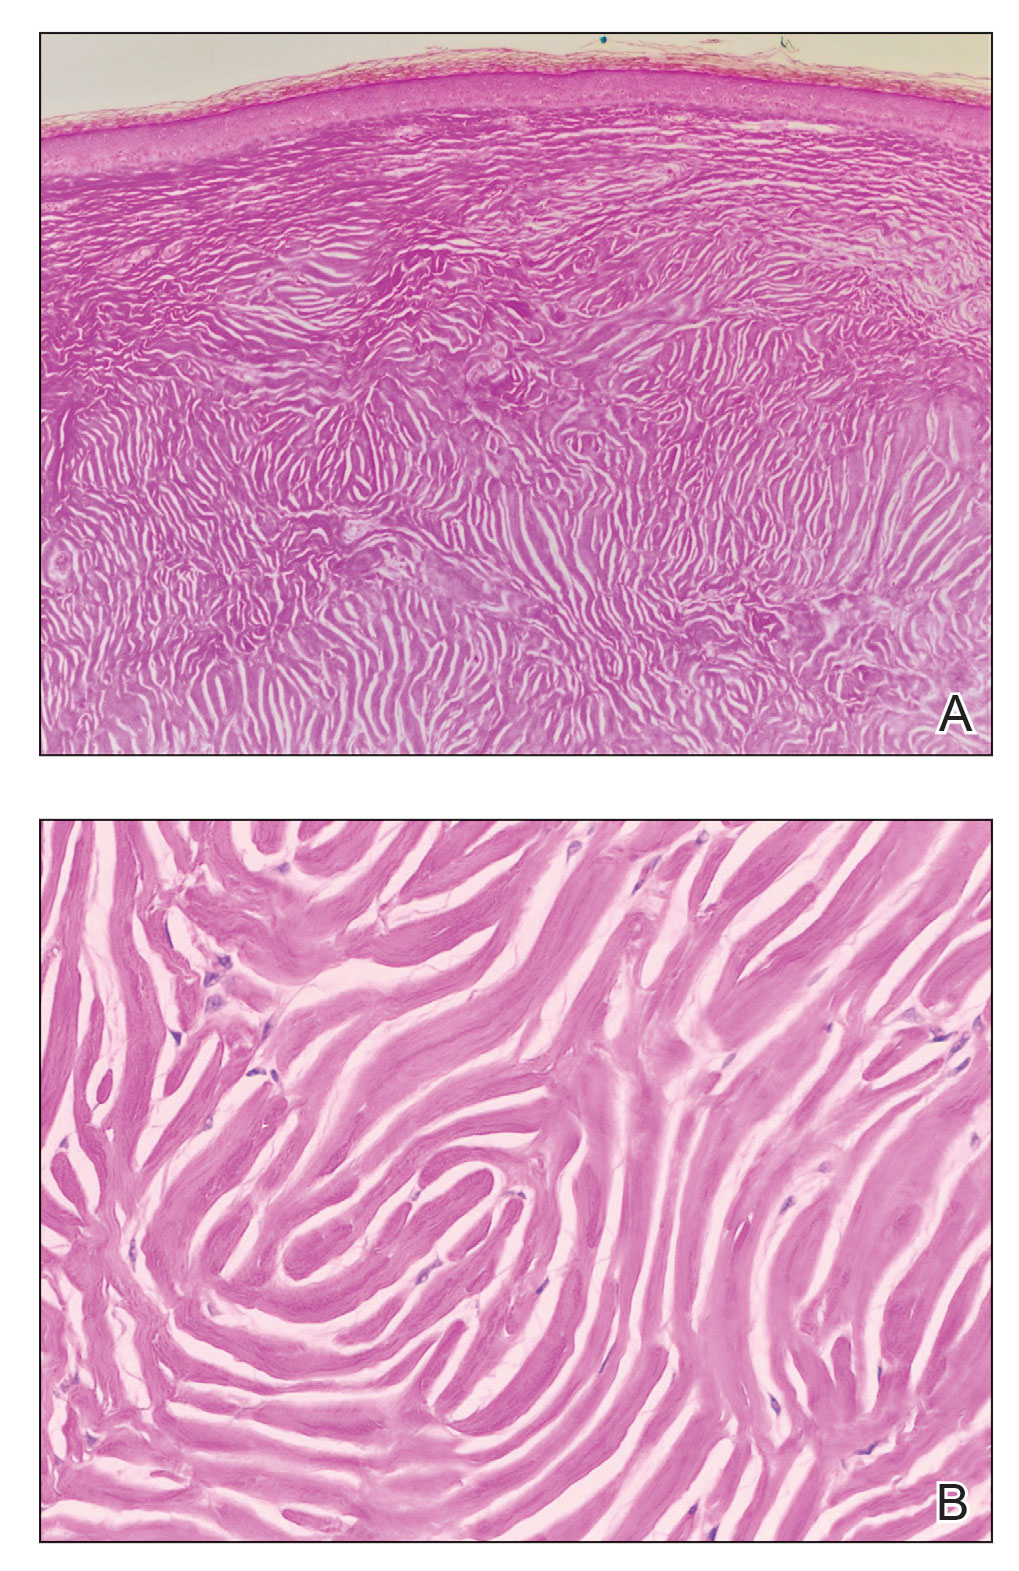 A, Unencapsulated dermal nodule with attenuated epidermis and a plywoodlike appearance (H&E, original magnification ×4). B, Thick and homogenized collagen bundles with prominent clefts and a whorled pattern (H&E, original magnification ×20).